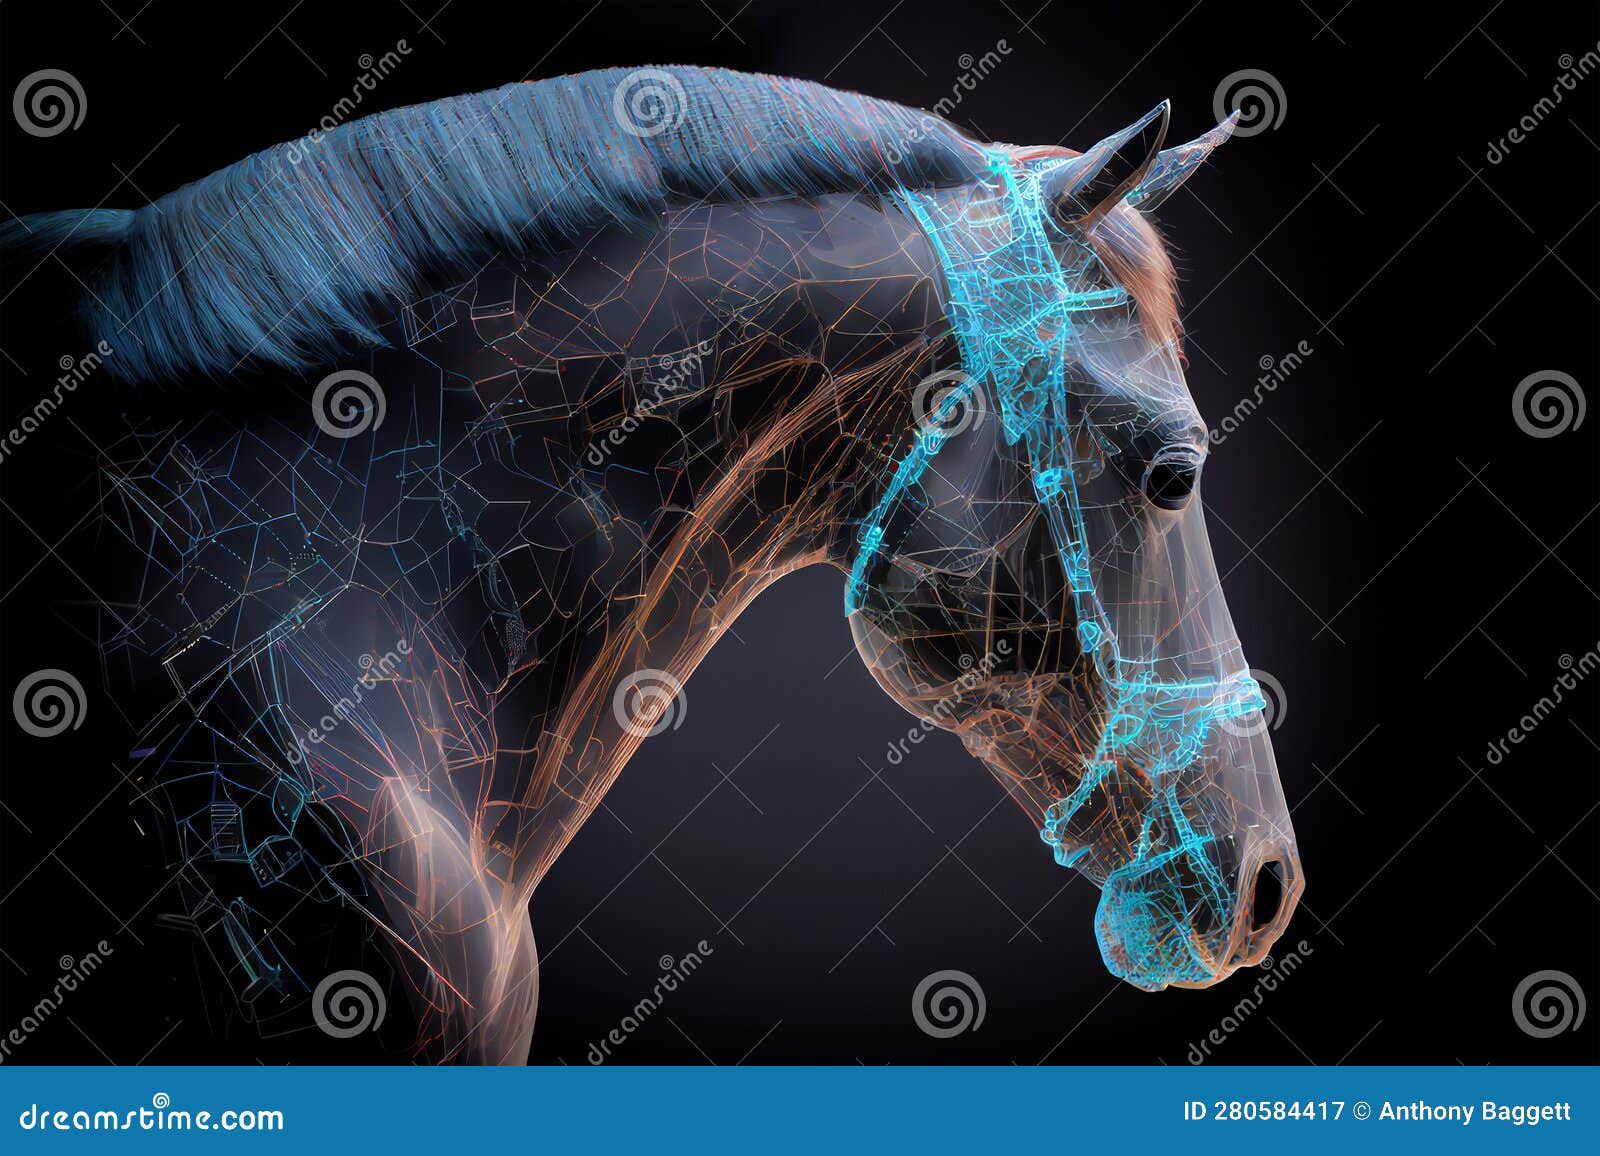 neural network of a horse with big data and artificial intelligence circuit board in the head of the equine animal, outlining